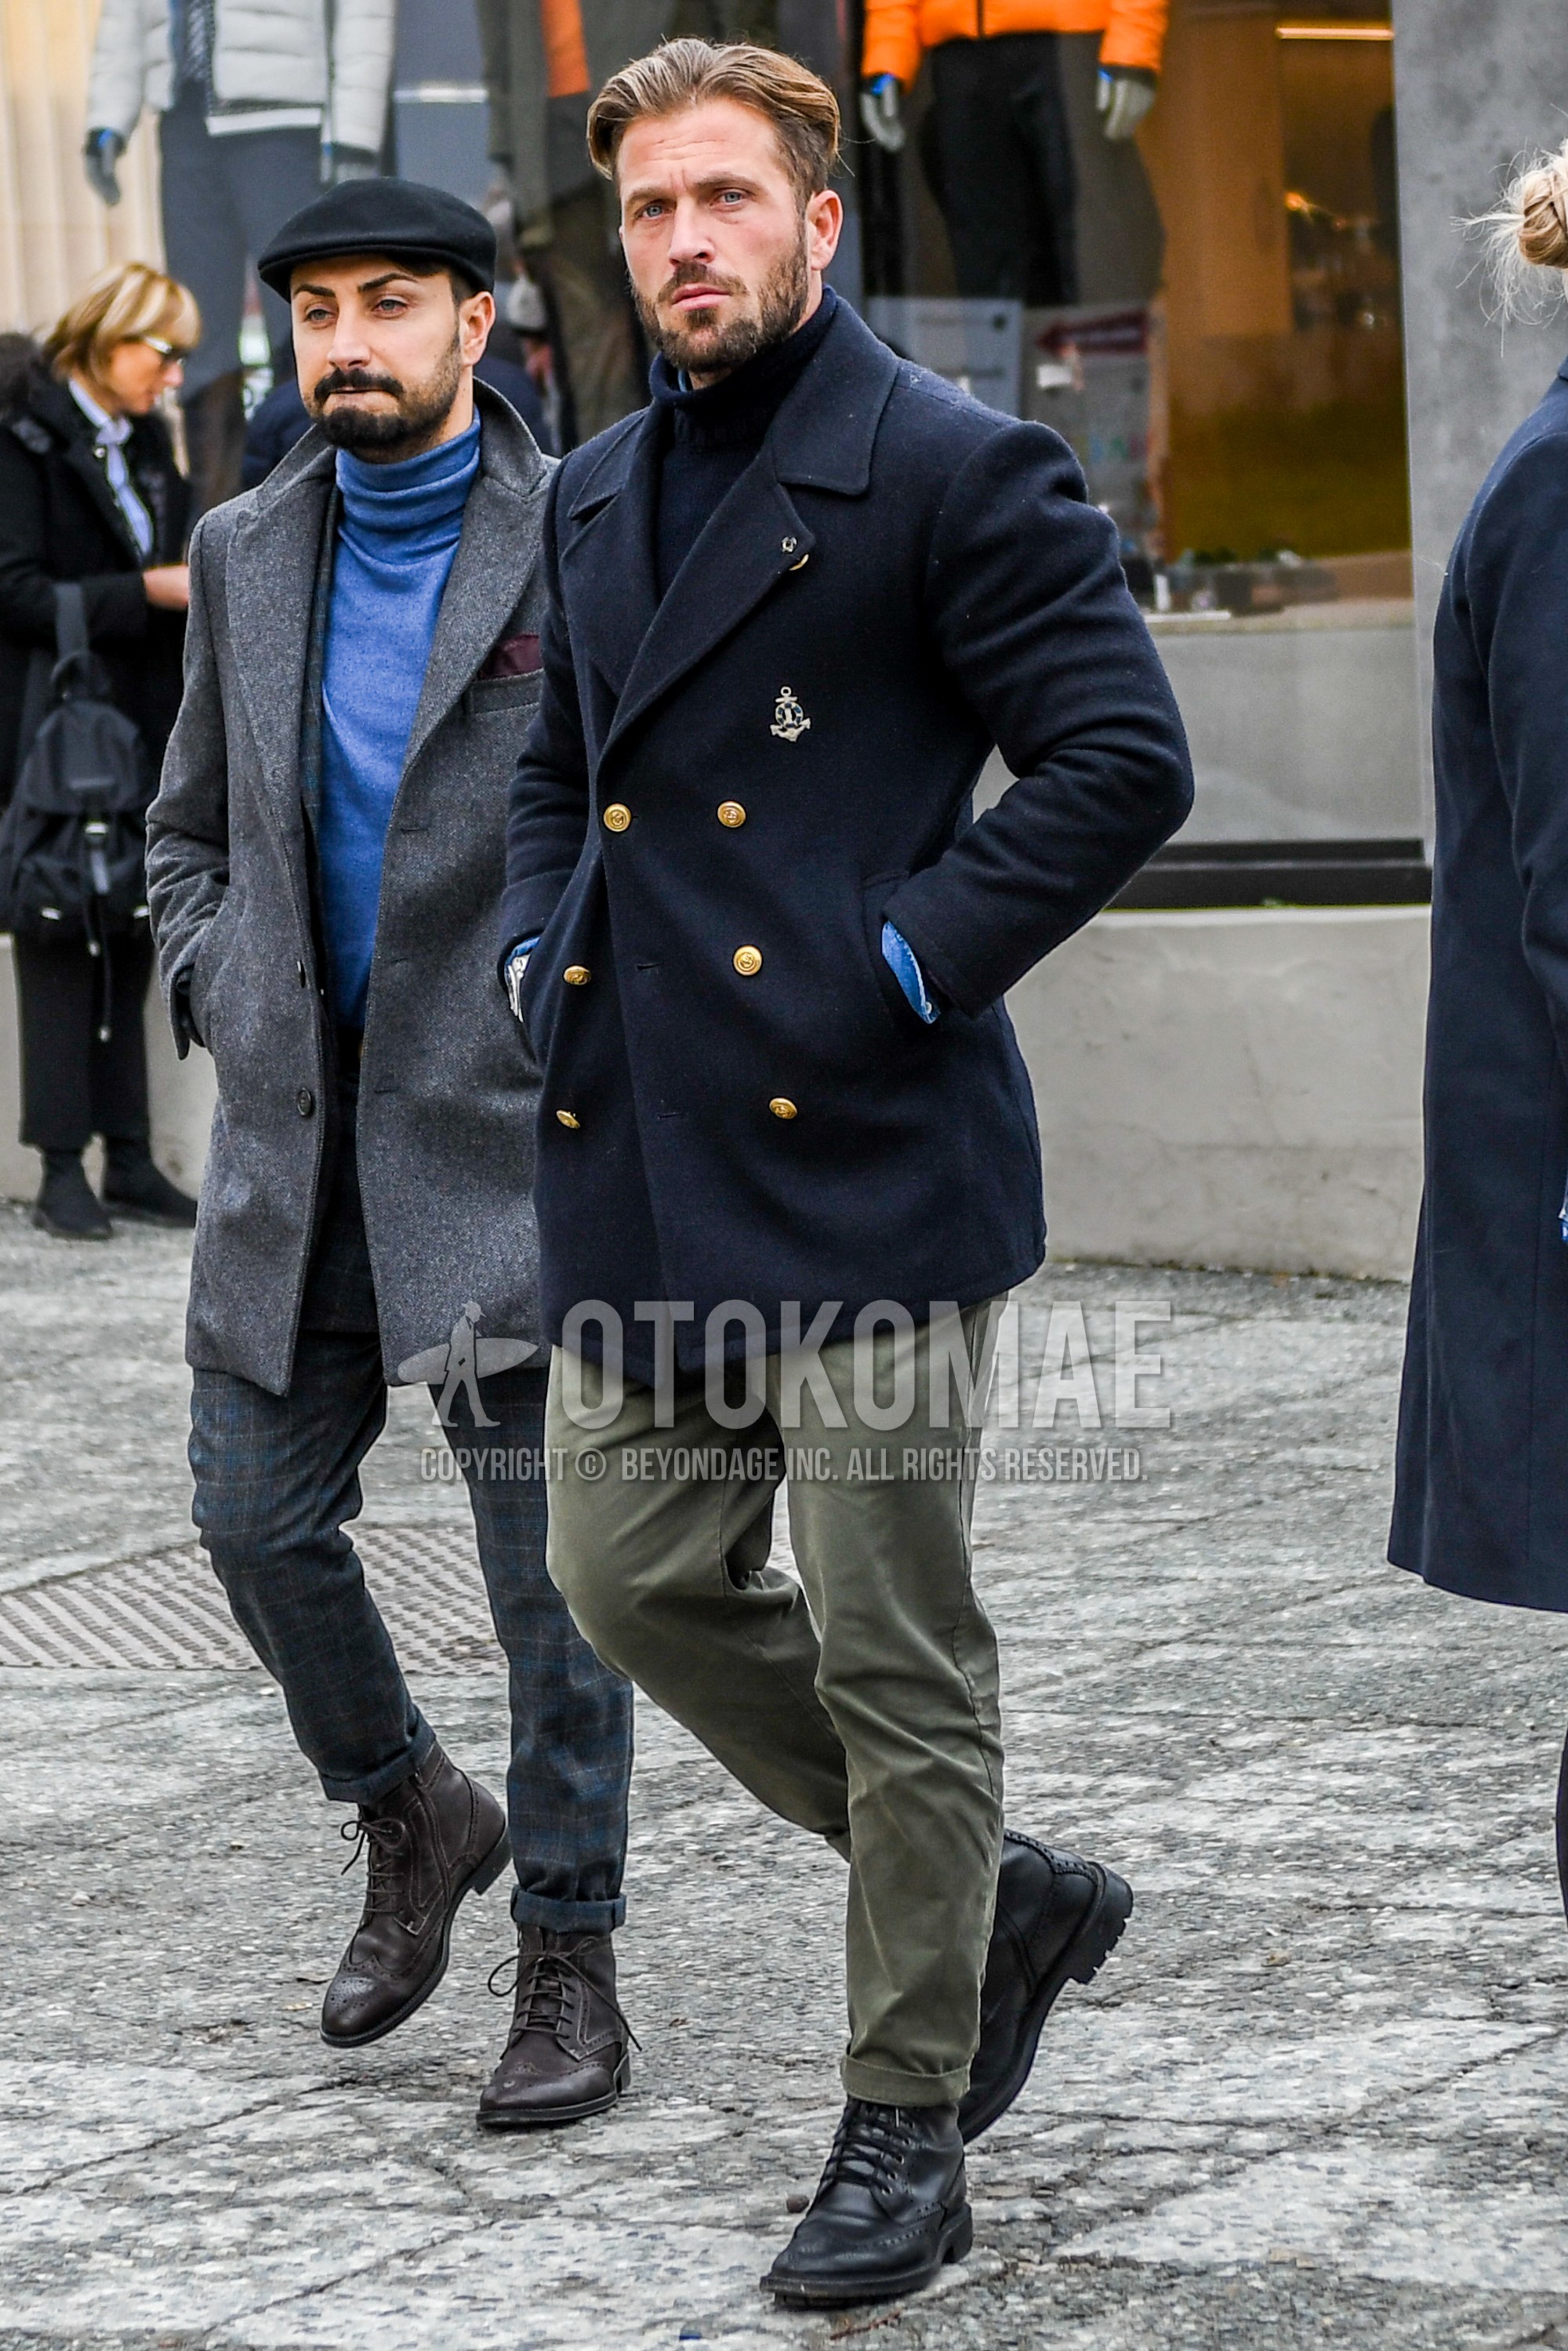 Men's winter outfit with navy plain tailored jacket, navy plain turtleneck knit, olive green plain chinos, black country boots.